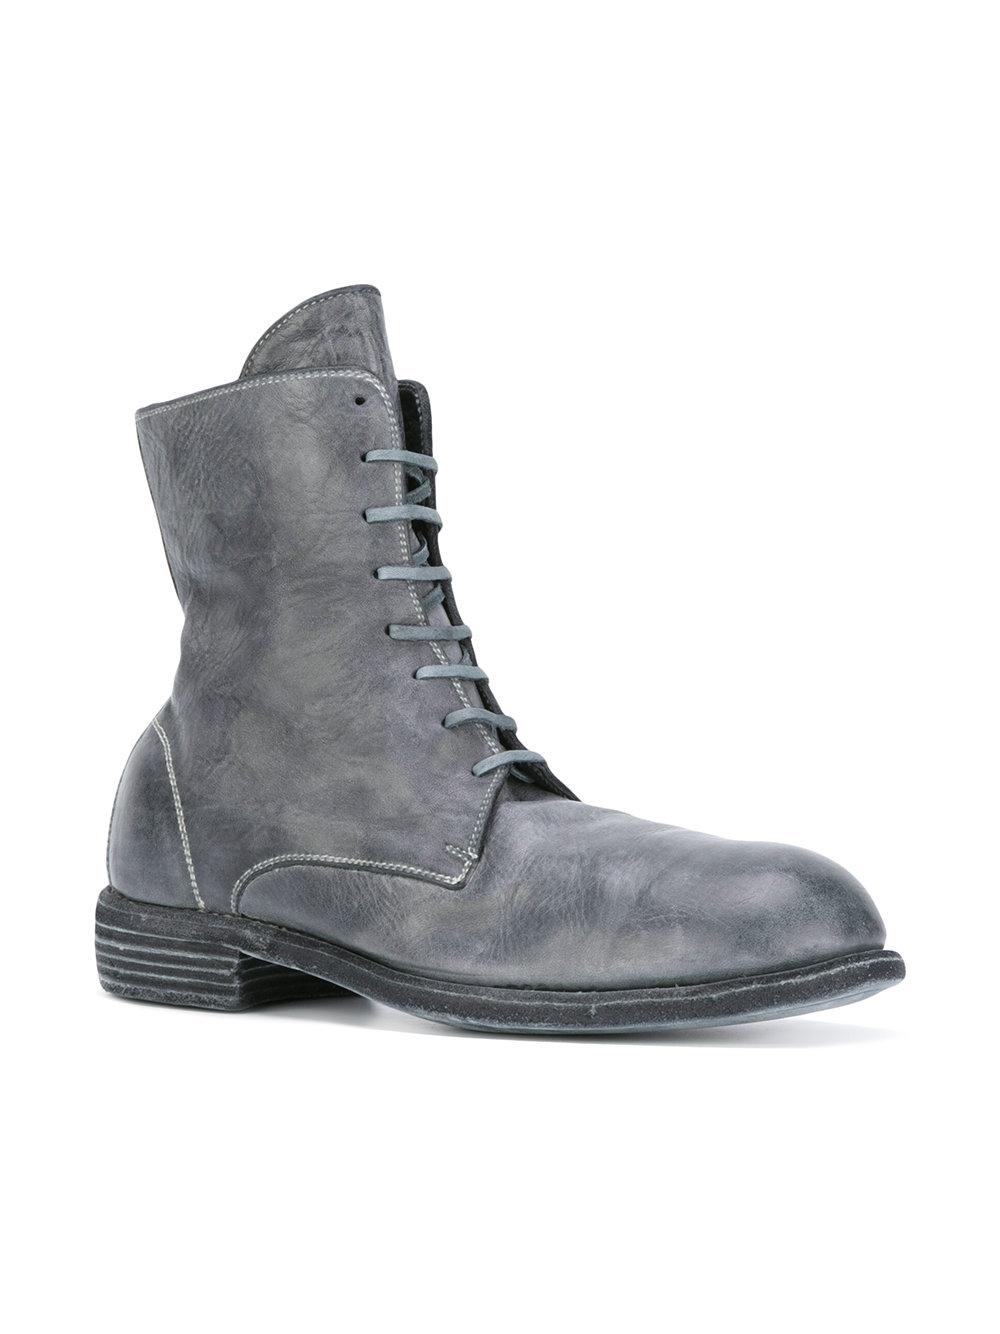 Lyst - Guidi Combat Boots in Gray for Men